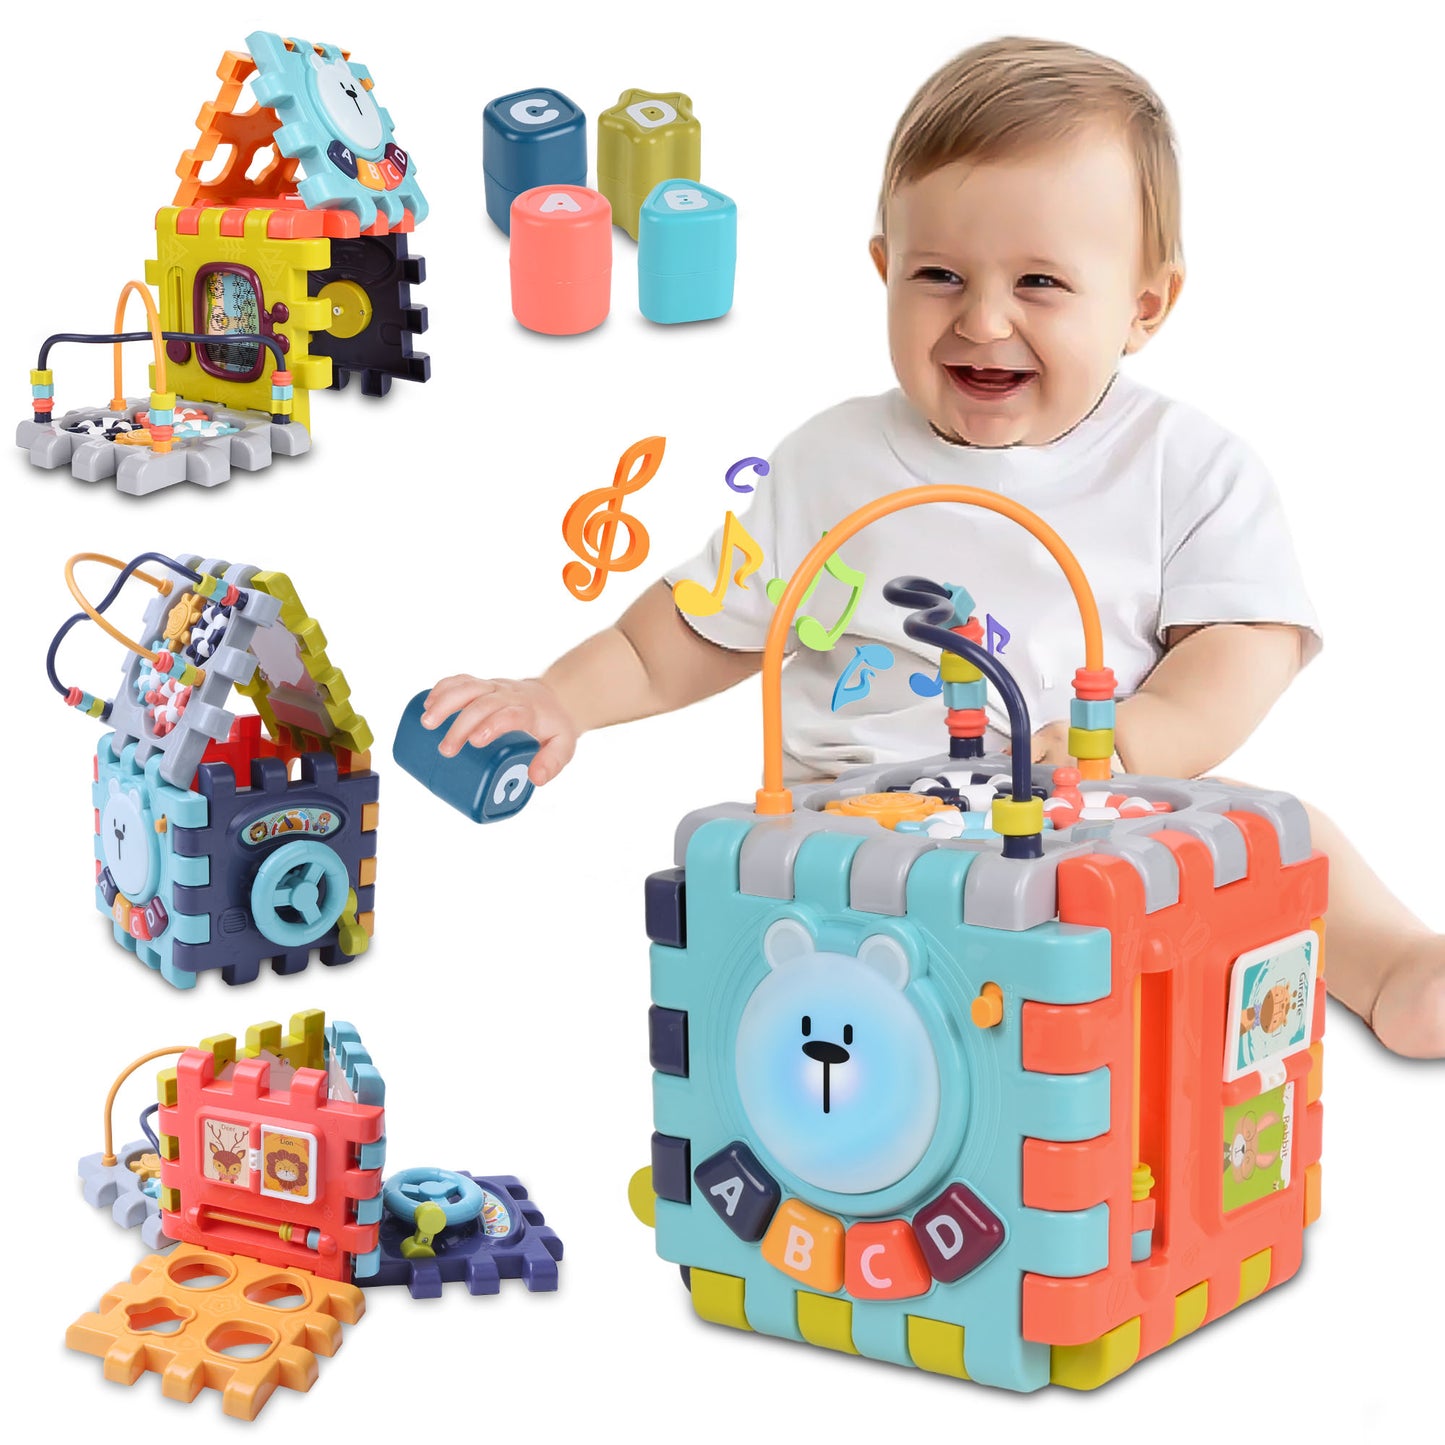 Wisairt Baby Activity Cube Learning Toys for 12-36 Months,Educational Montessori Toddler Toys Easter Birthday Party Gifts for Boys Girls